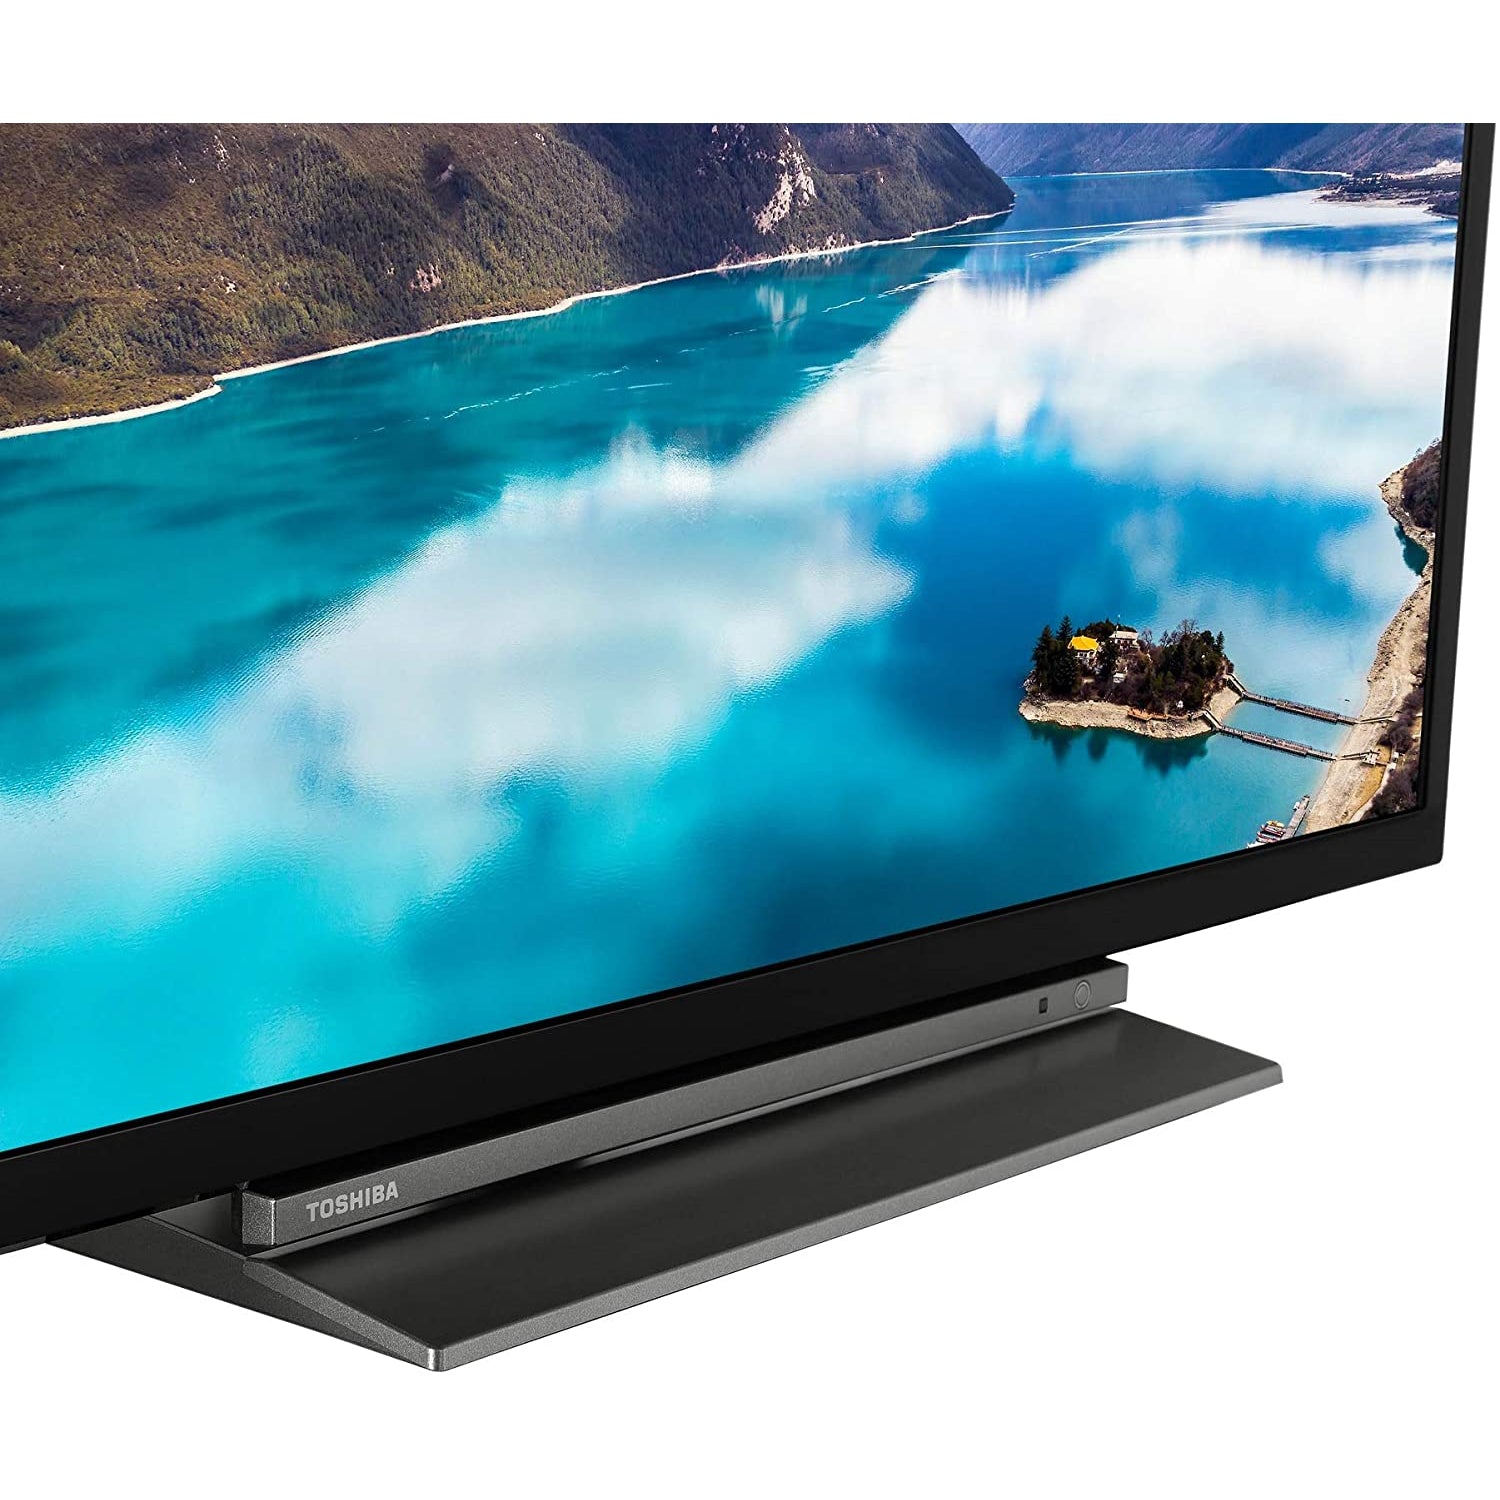 Toshiba 24WL3A63DB (2019) LED HD Ready 720p Smart TV, 24” with Freeview Play, Black